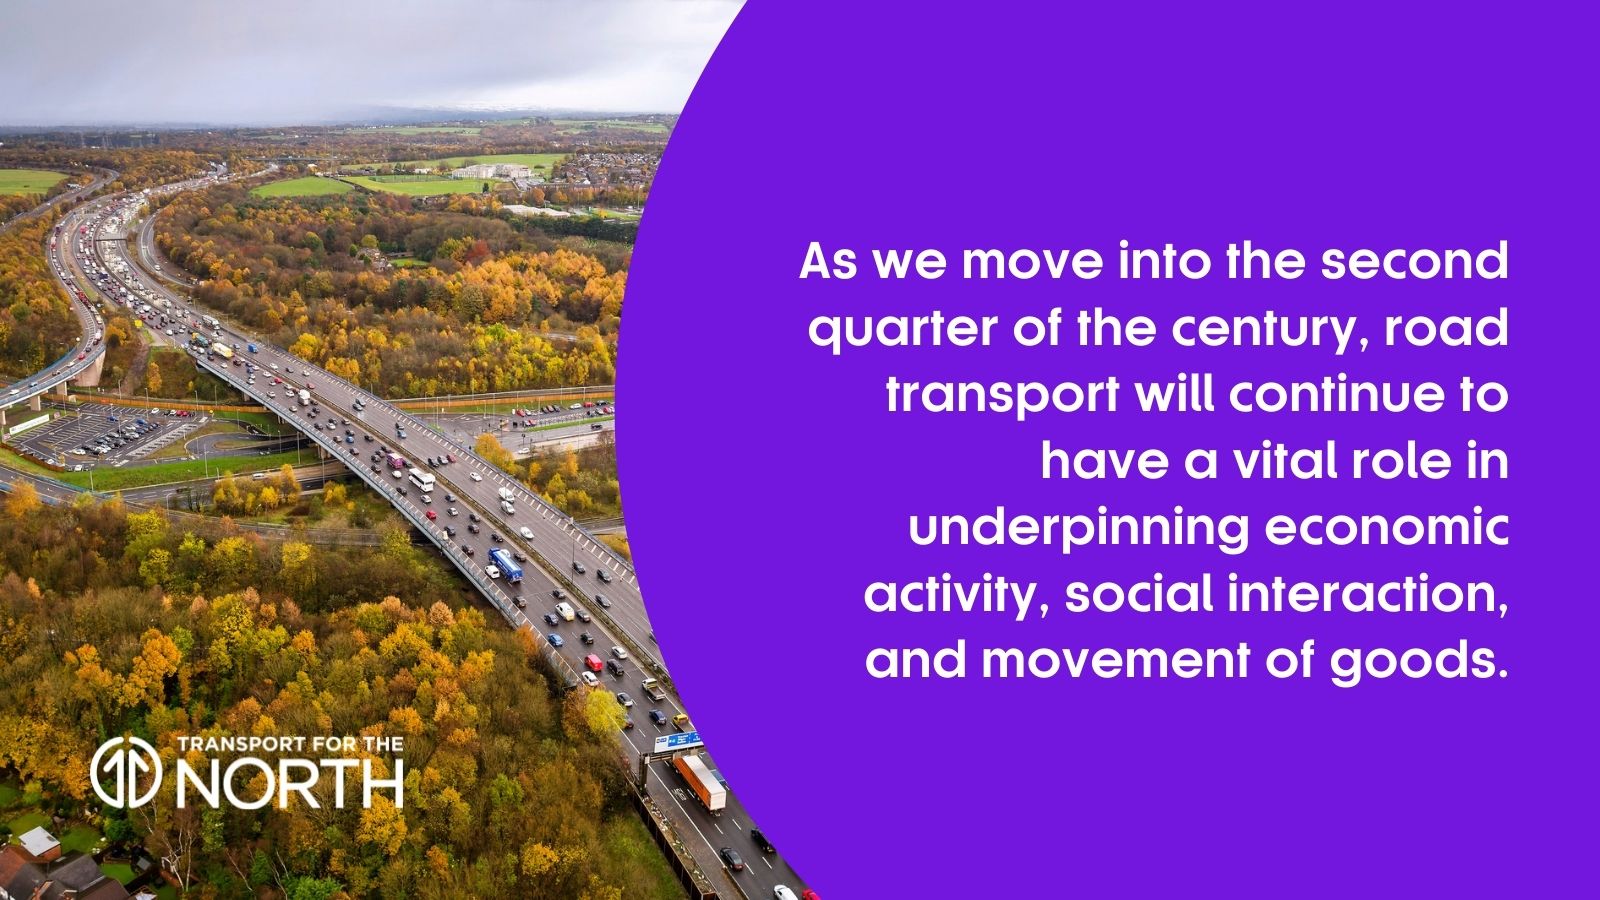 As we move into the second quarter of the century, road transport will continue to have a vital role in underpinning economic activity, social interaction, and movement of goods.